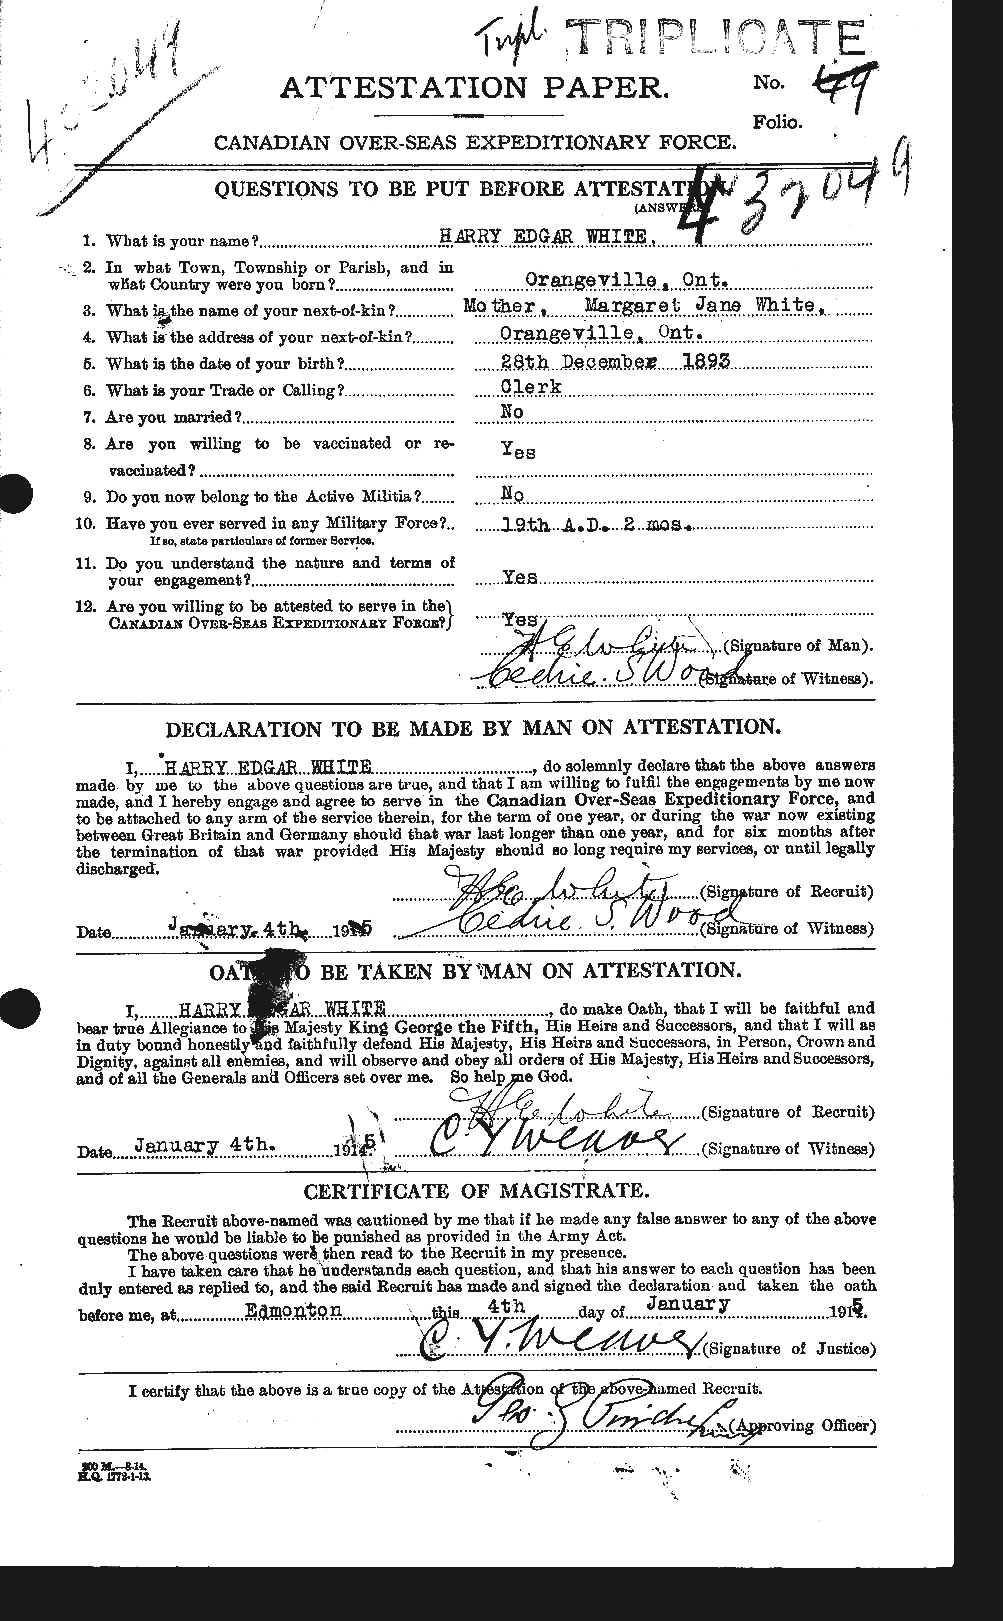 Personnel Records of the First World War - CEF 669607a